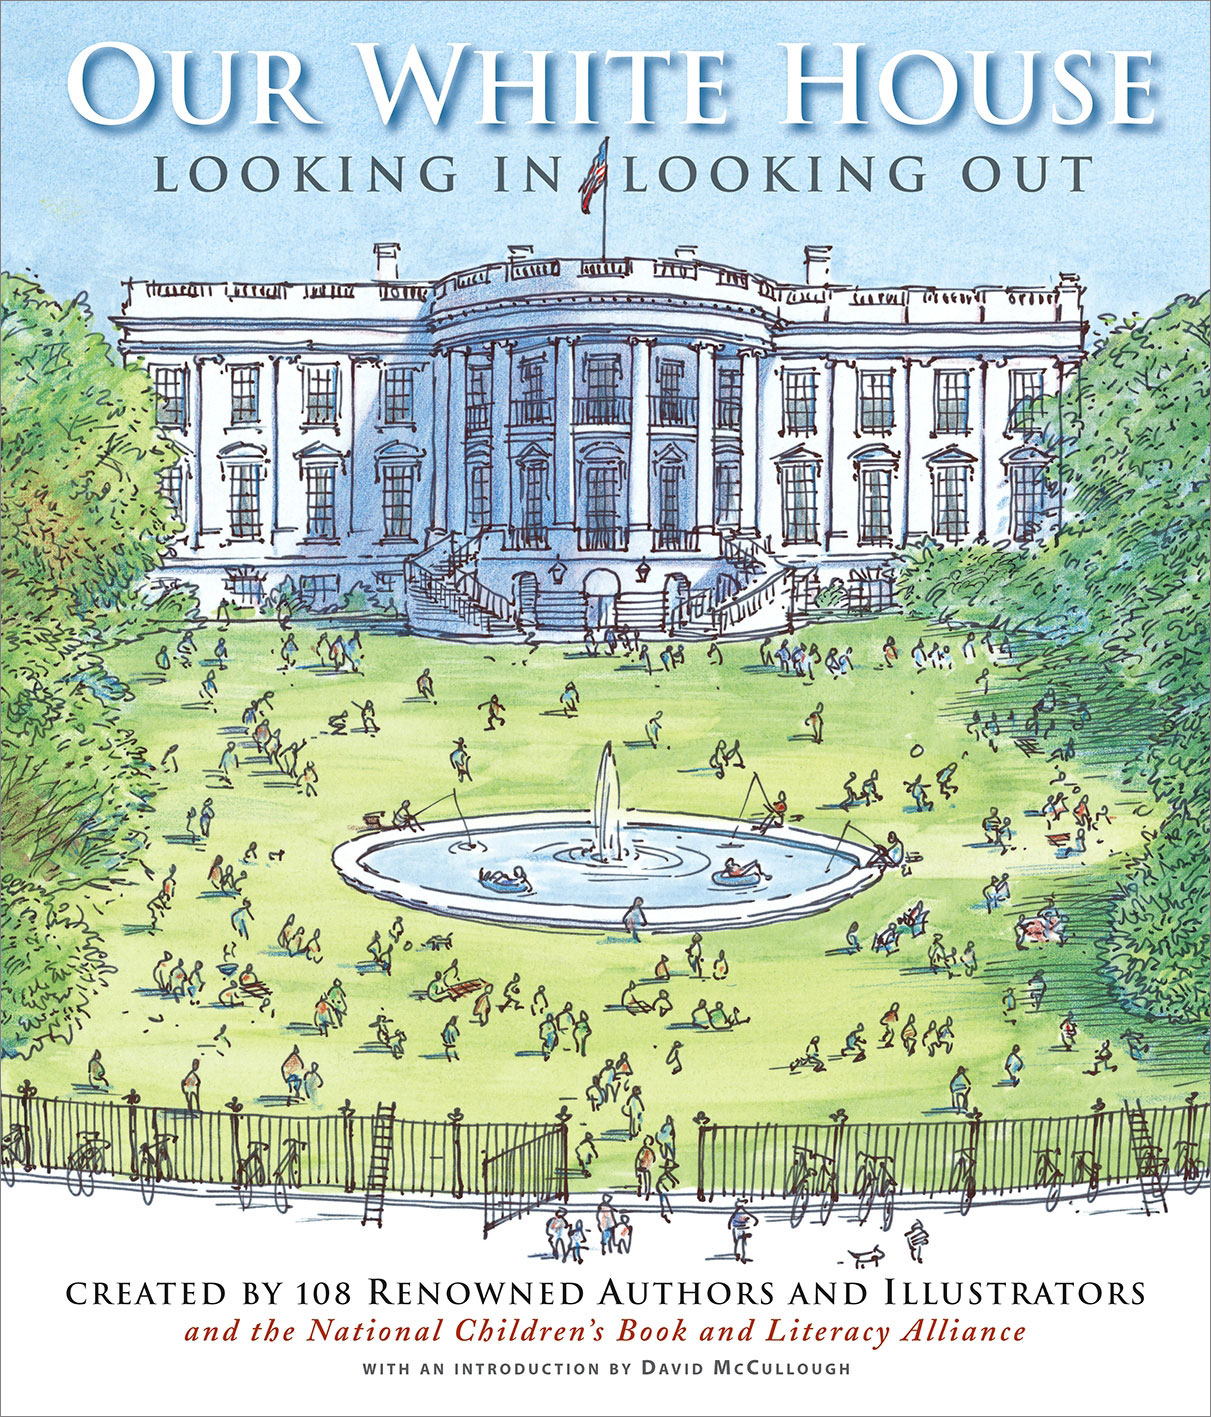 Watercolor illustration of the White House with many people on the lawn